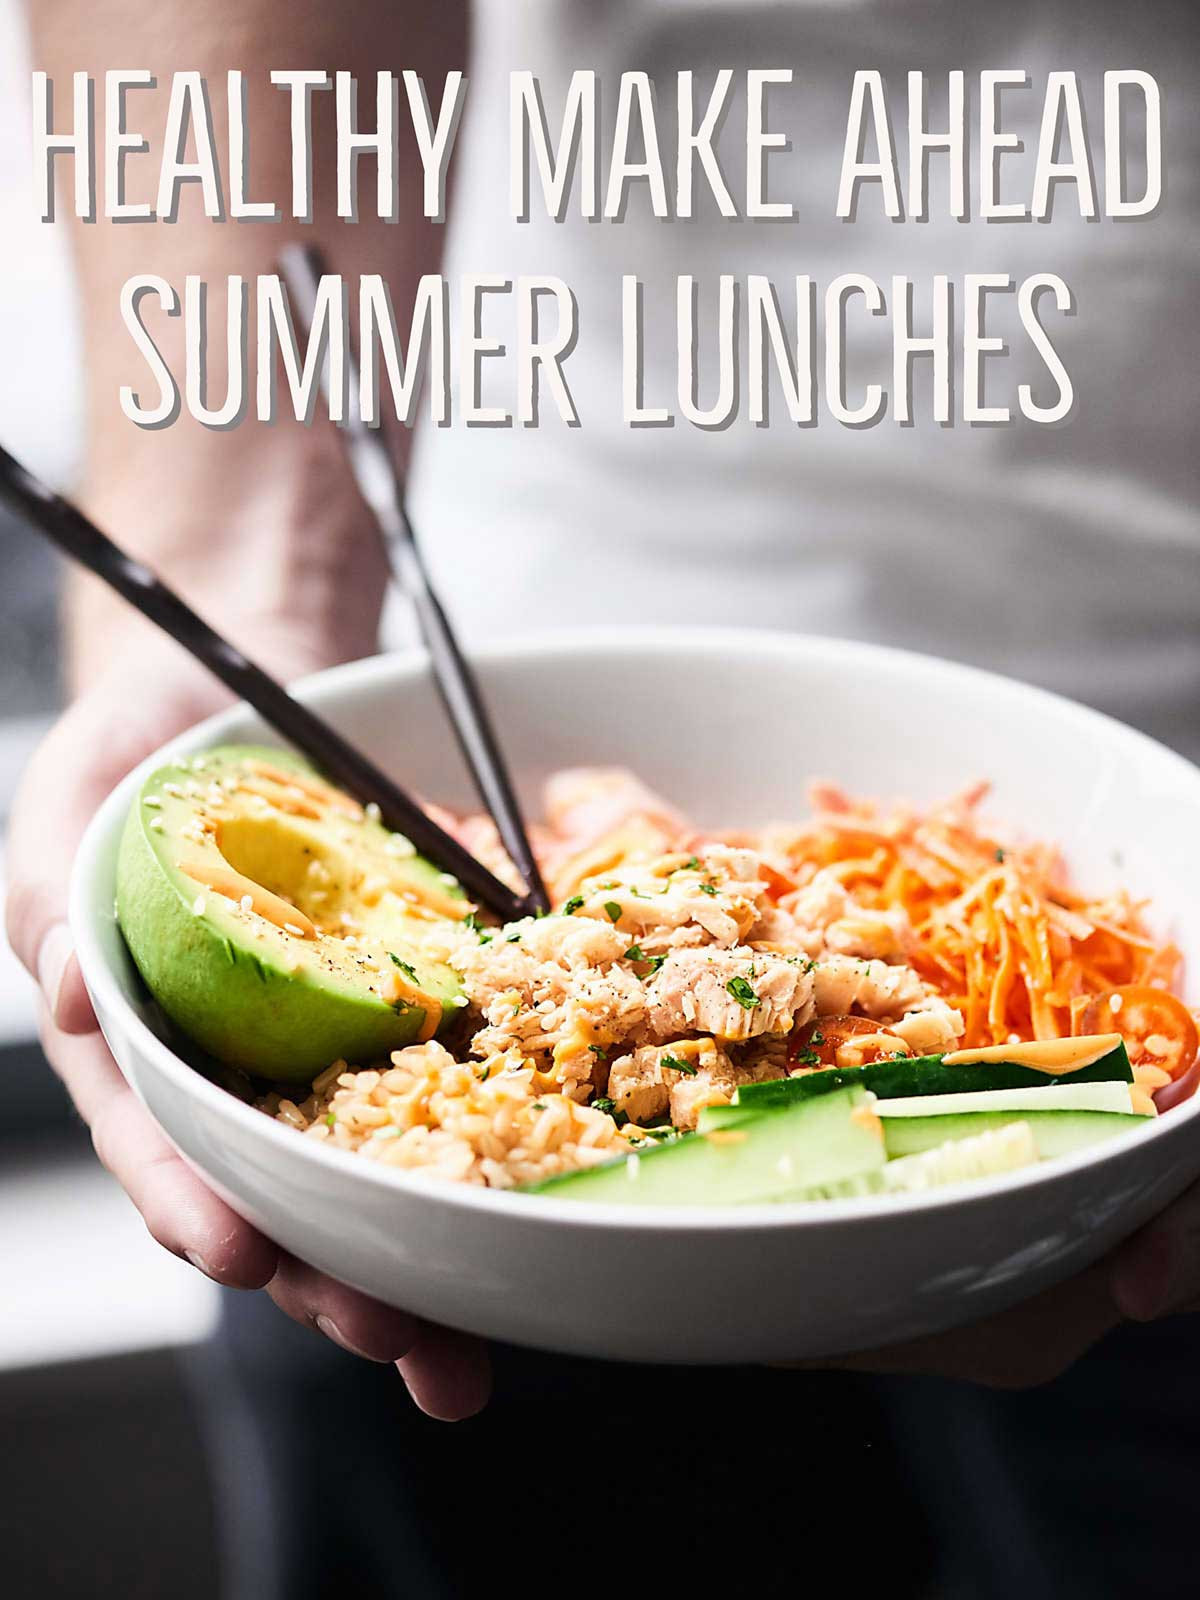 Make Ahead Healthy Lunches
 Easy Healthy Make Ahead Summer Lunches That Aren t All